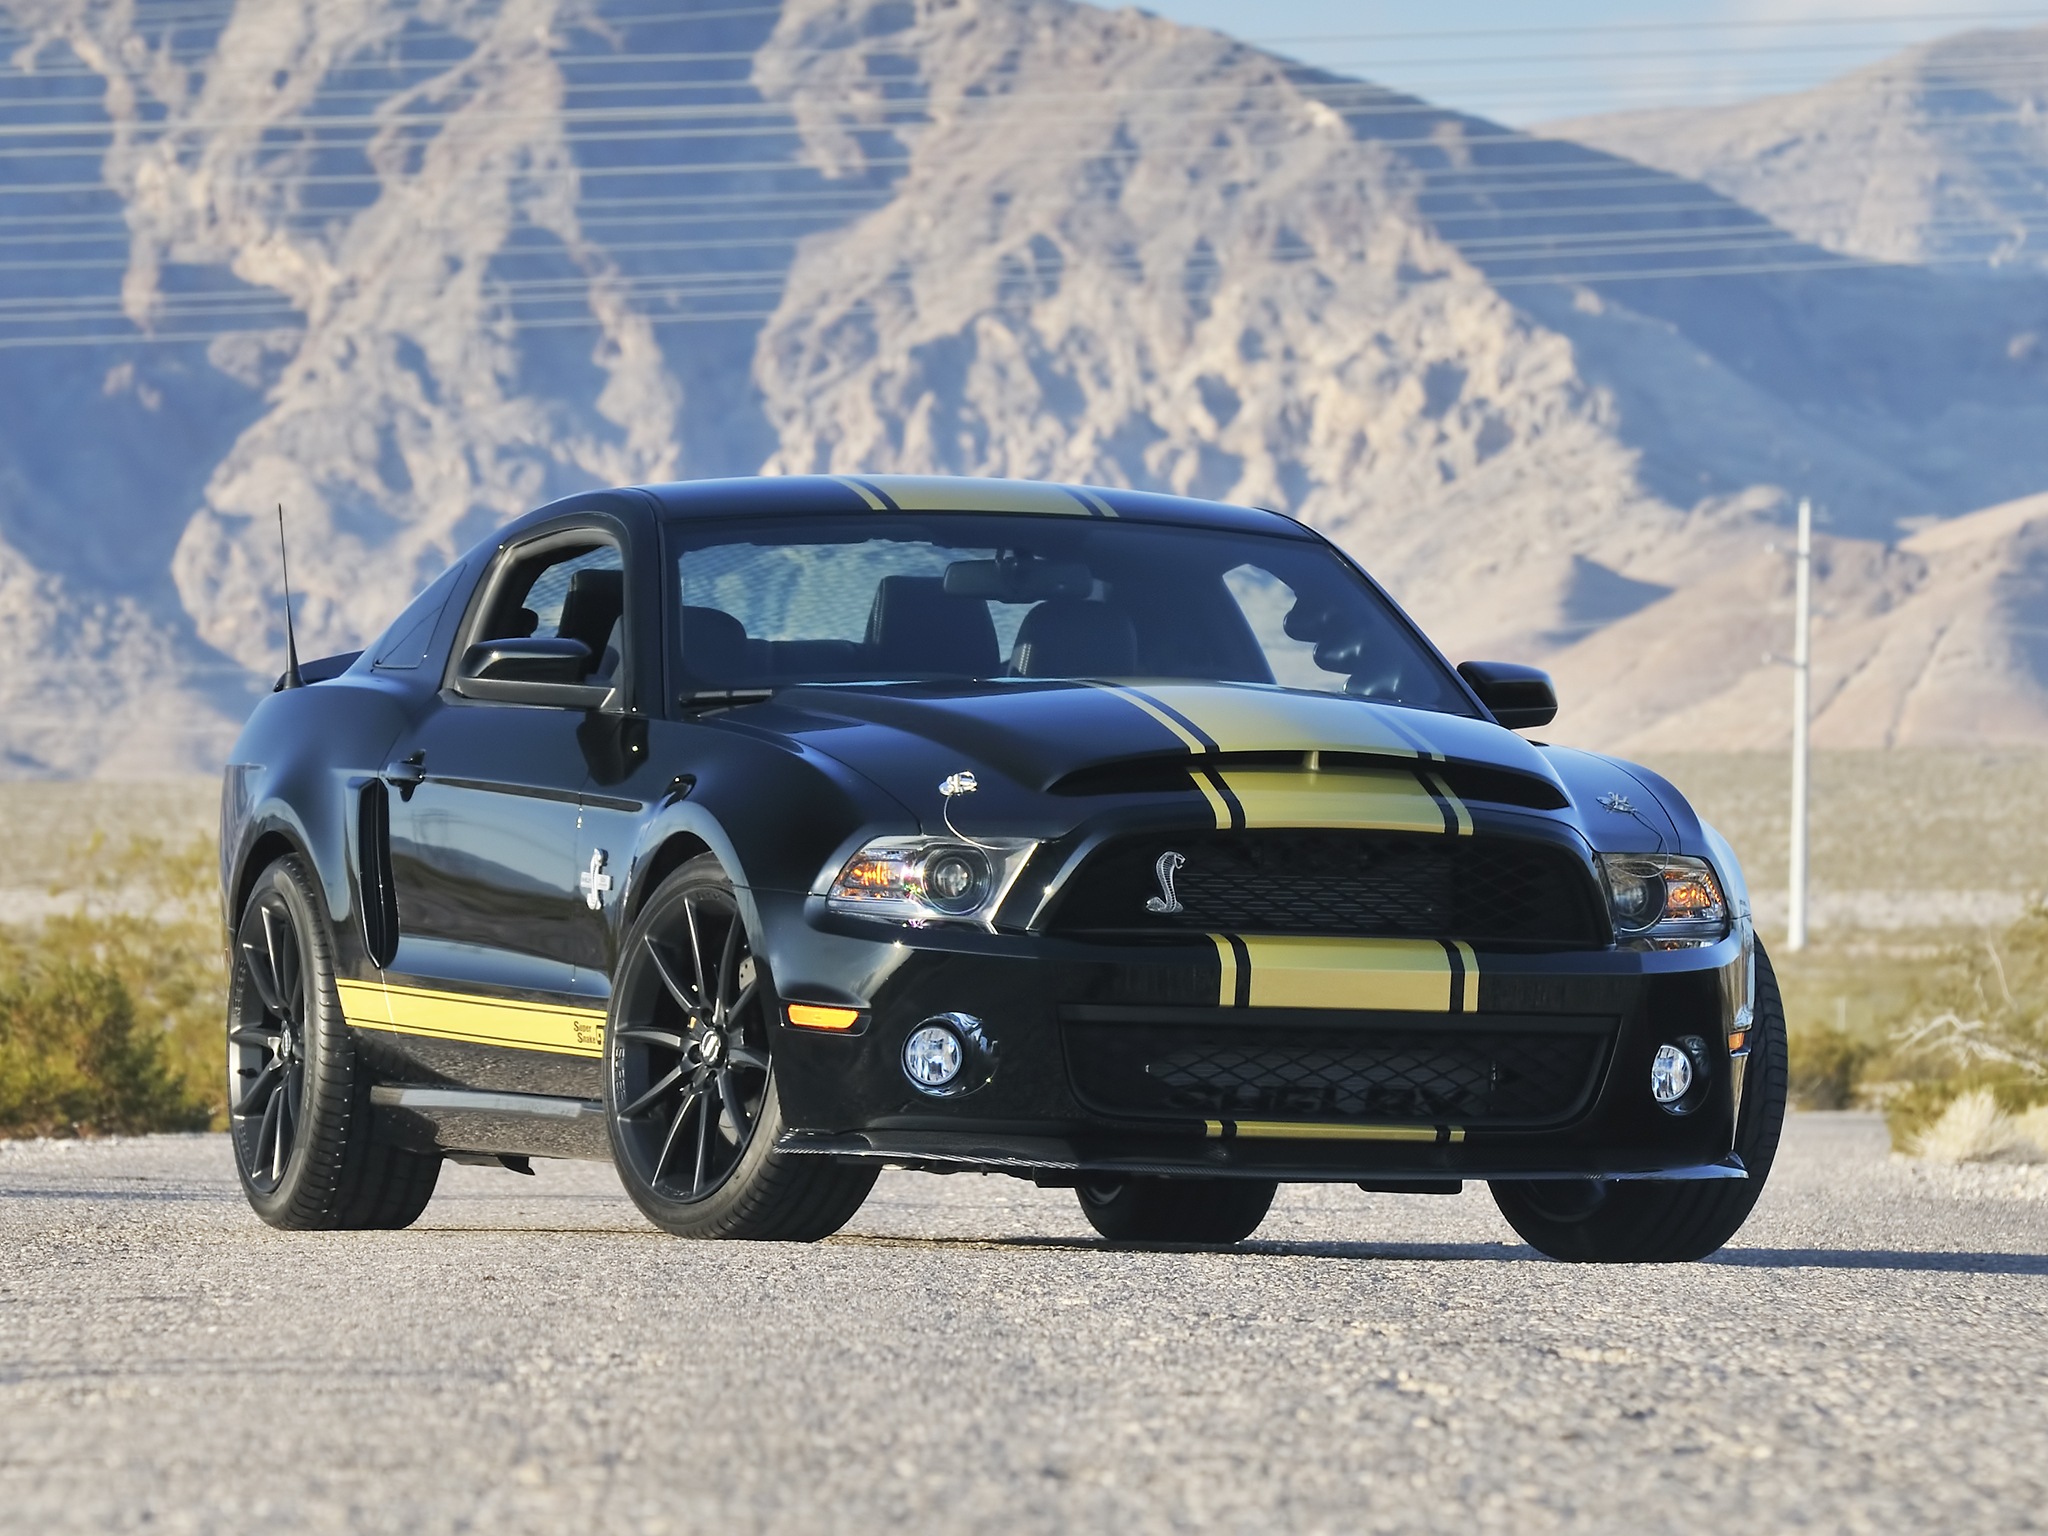 2012, Shelby, Gt500, Super snake, Ford, Mustang, Muscle Wallpaper